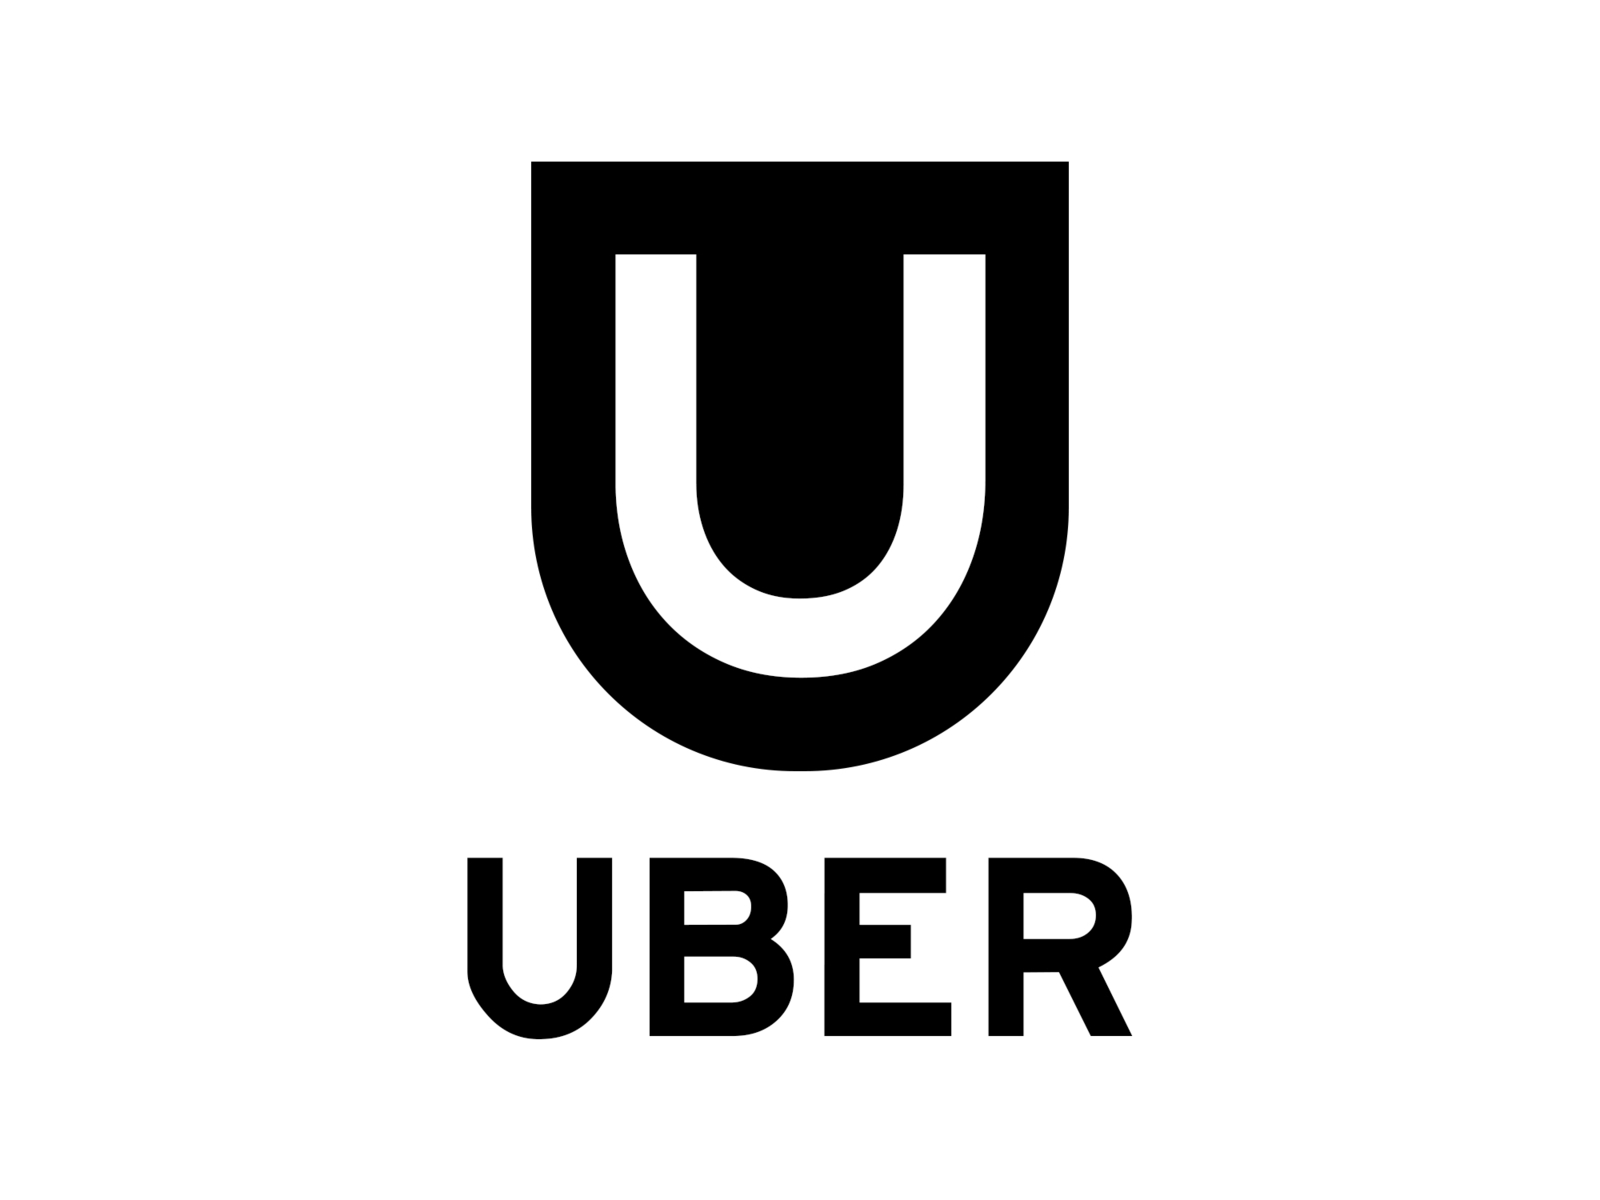 uber-logo-redesign-concept-by-lind-rama-on-dribbble